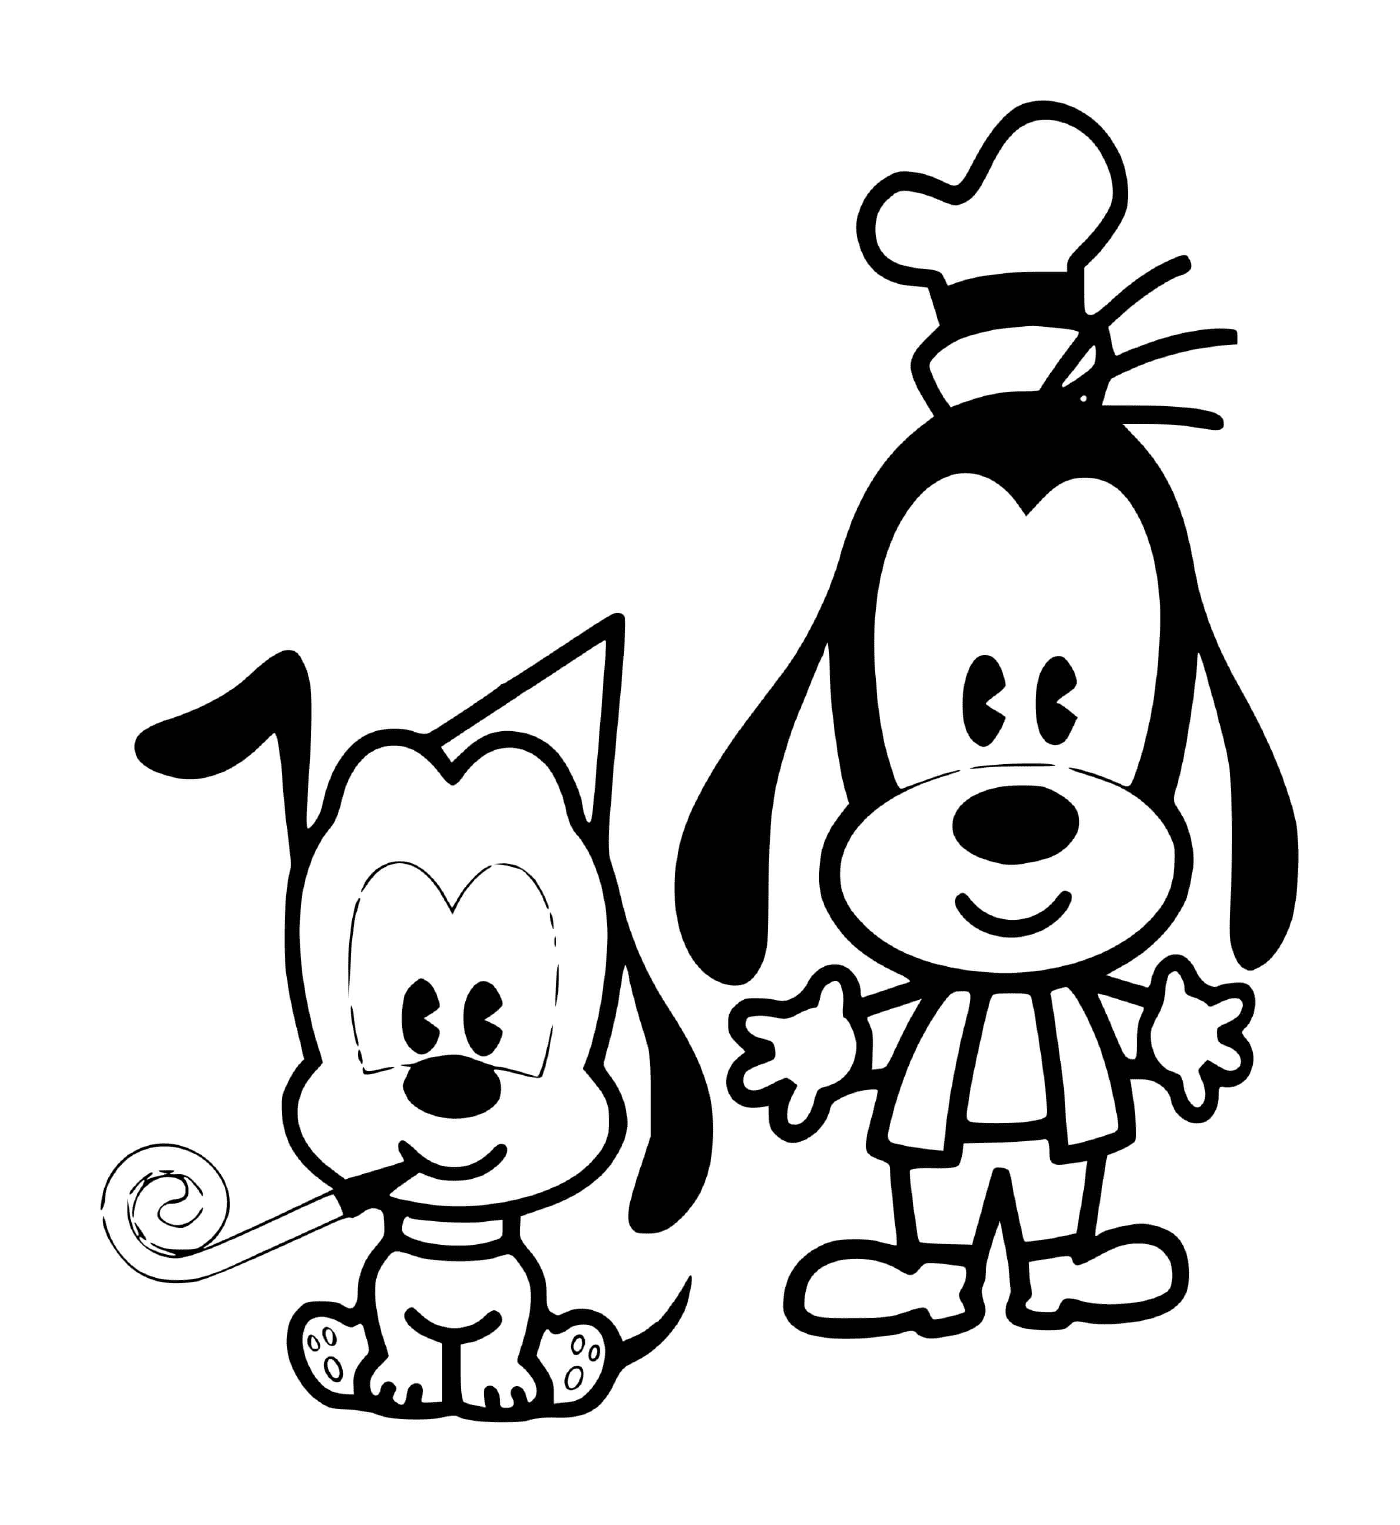  Dingo and Pluto baby for a birthday 